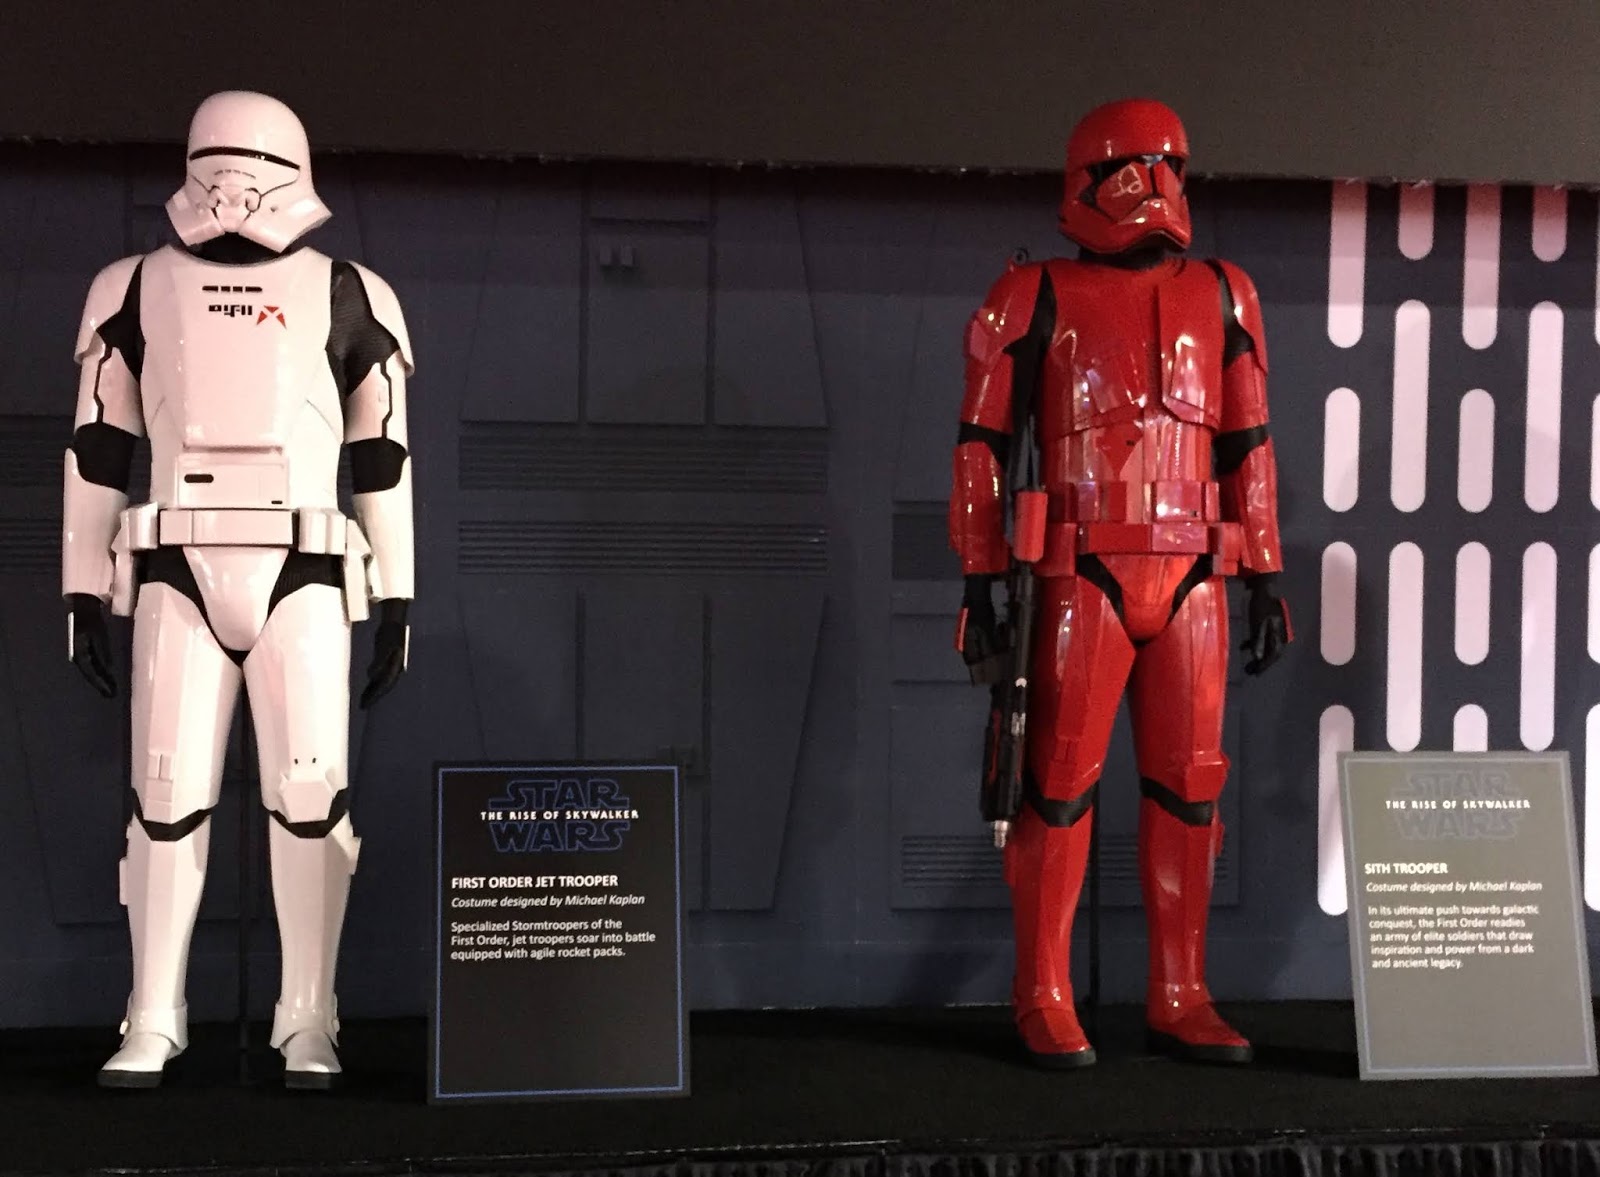 D23 Expo 2019: First Look at the STAR WARS: THE RISE OF SKYWALKER Jet Trooper1600 x 1177